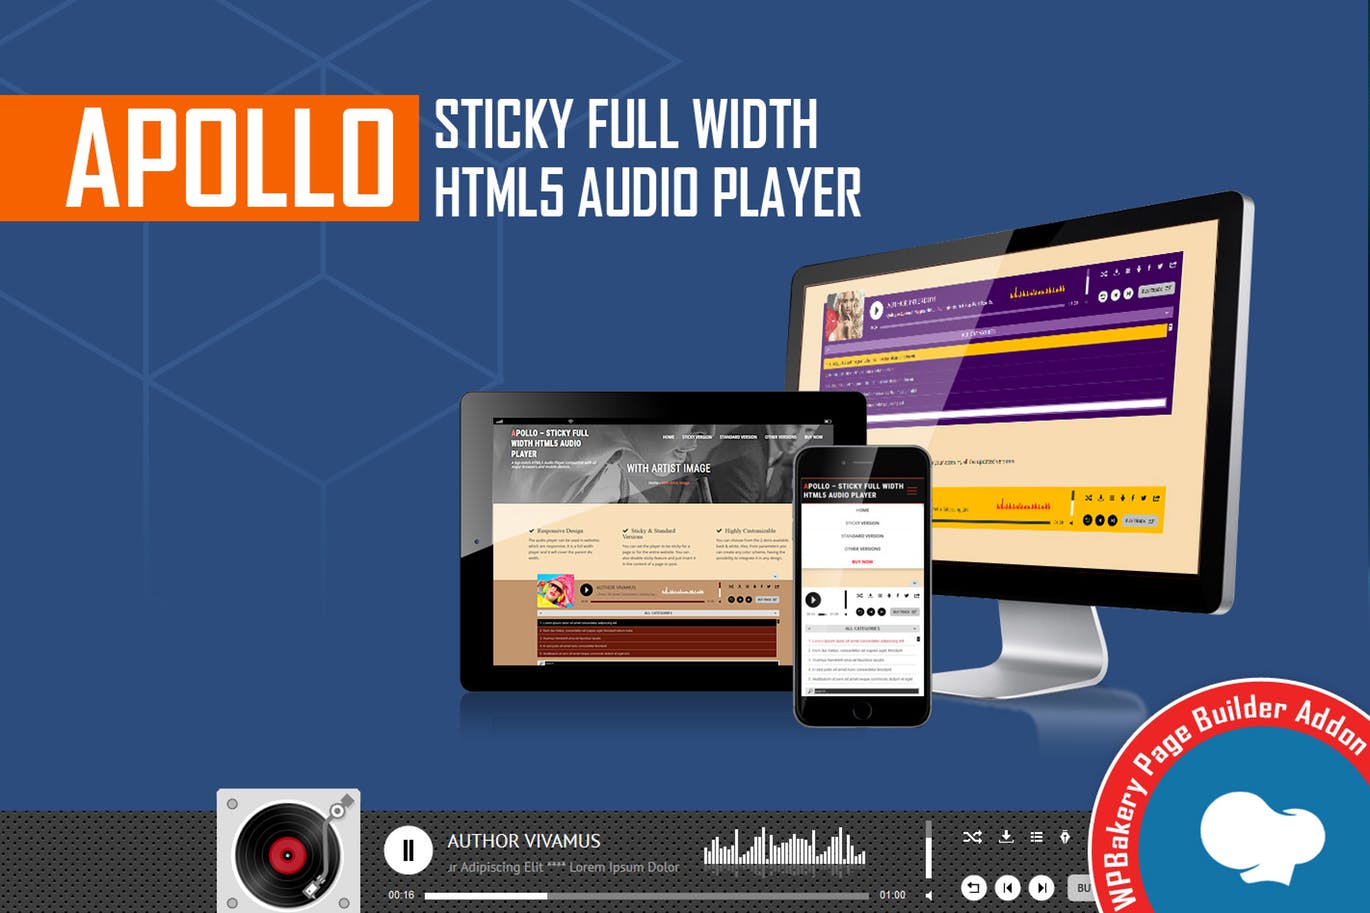 Apollo - Sticky Full Width HTML5 Audio Player - WPBakery Page Builder Addon